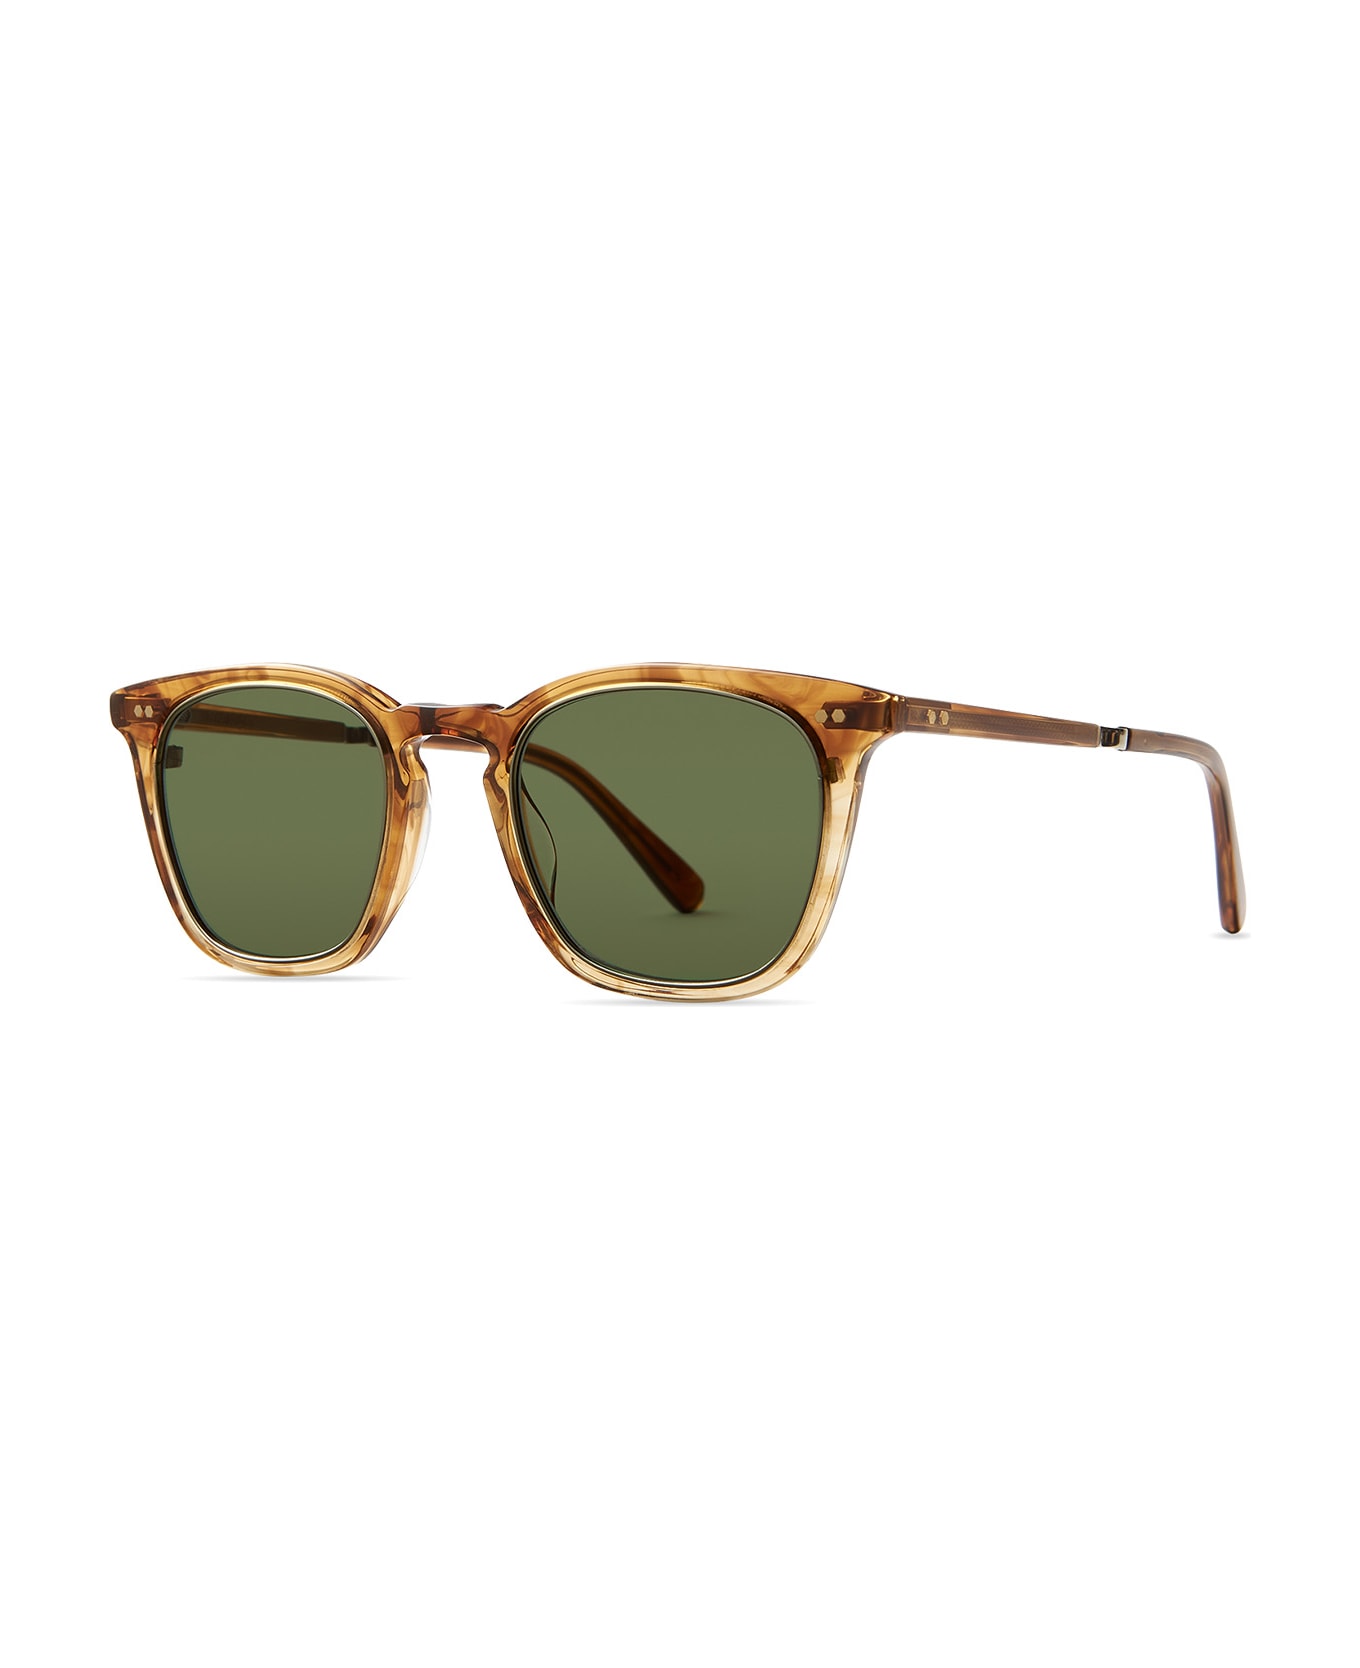 Mr. Leight Getty Ii S Marbled Rye-antique Gold Sunglasses - Marbled Rye-Antique Gold サングラス